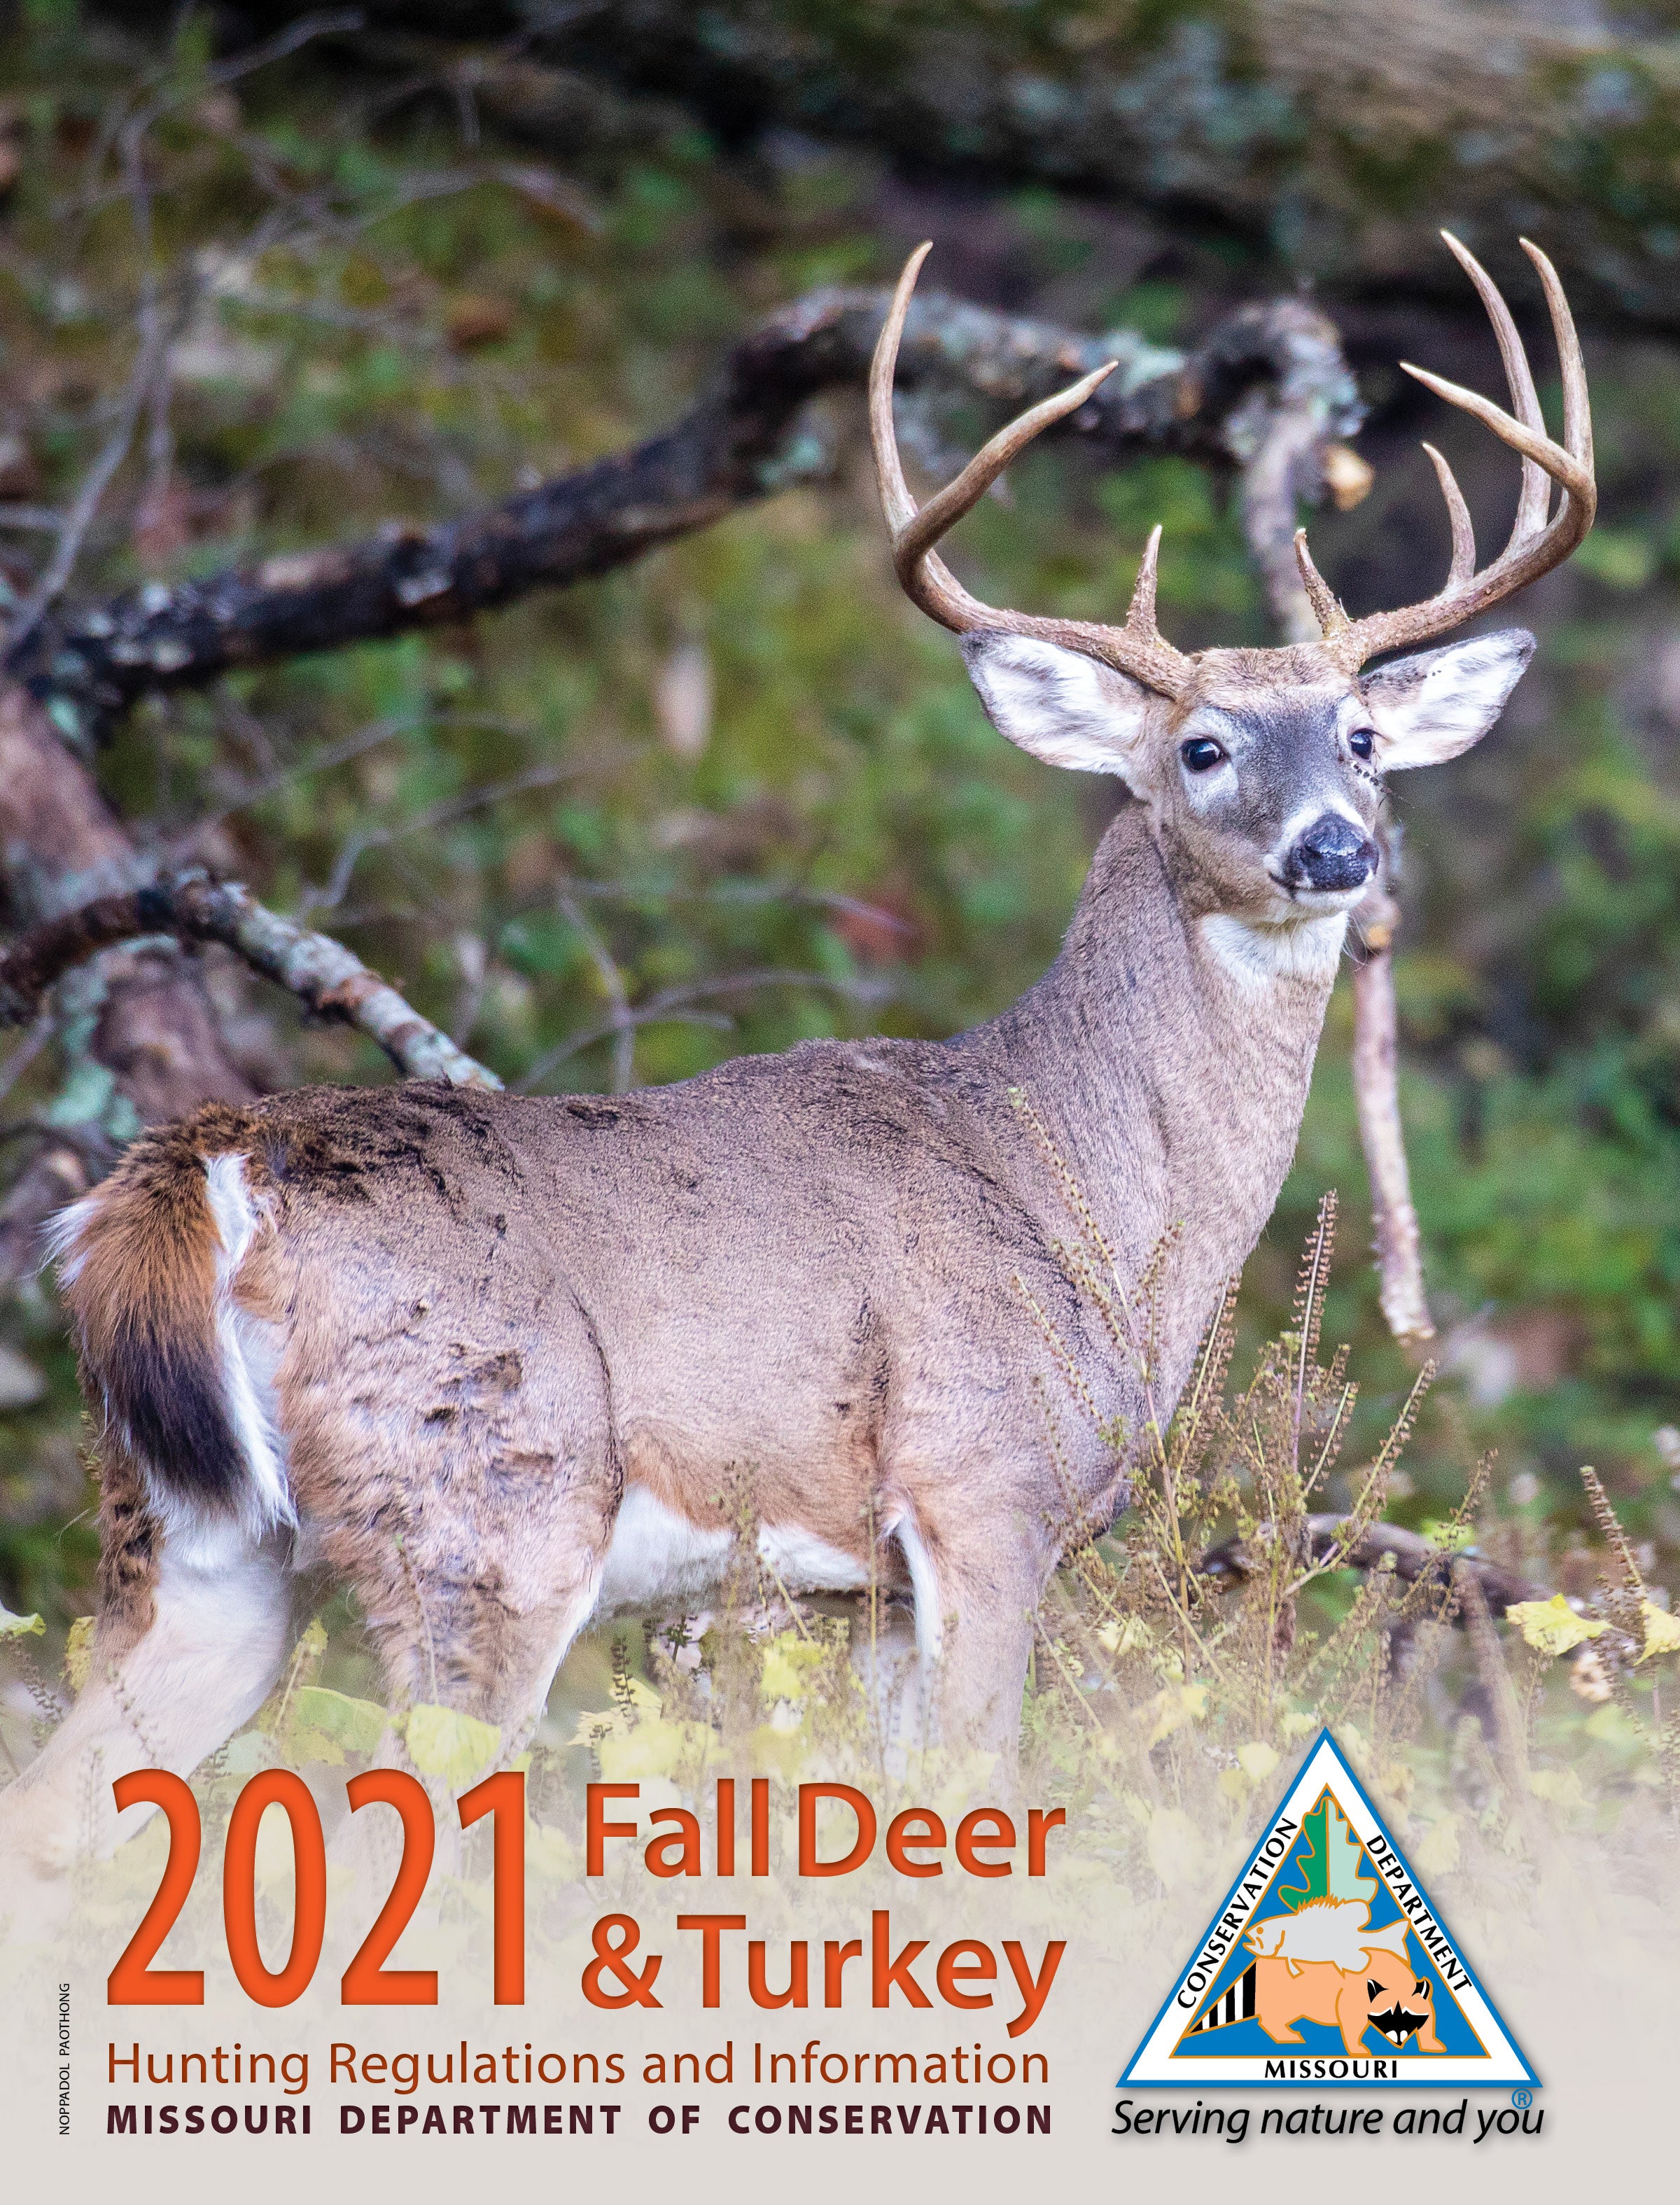 mdc-shares-key-deer-hunting-info-for-upcoming-firearms-season-missouri-department-of-conservation